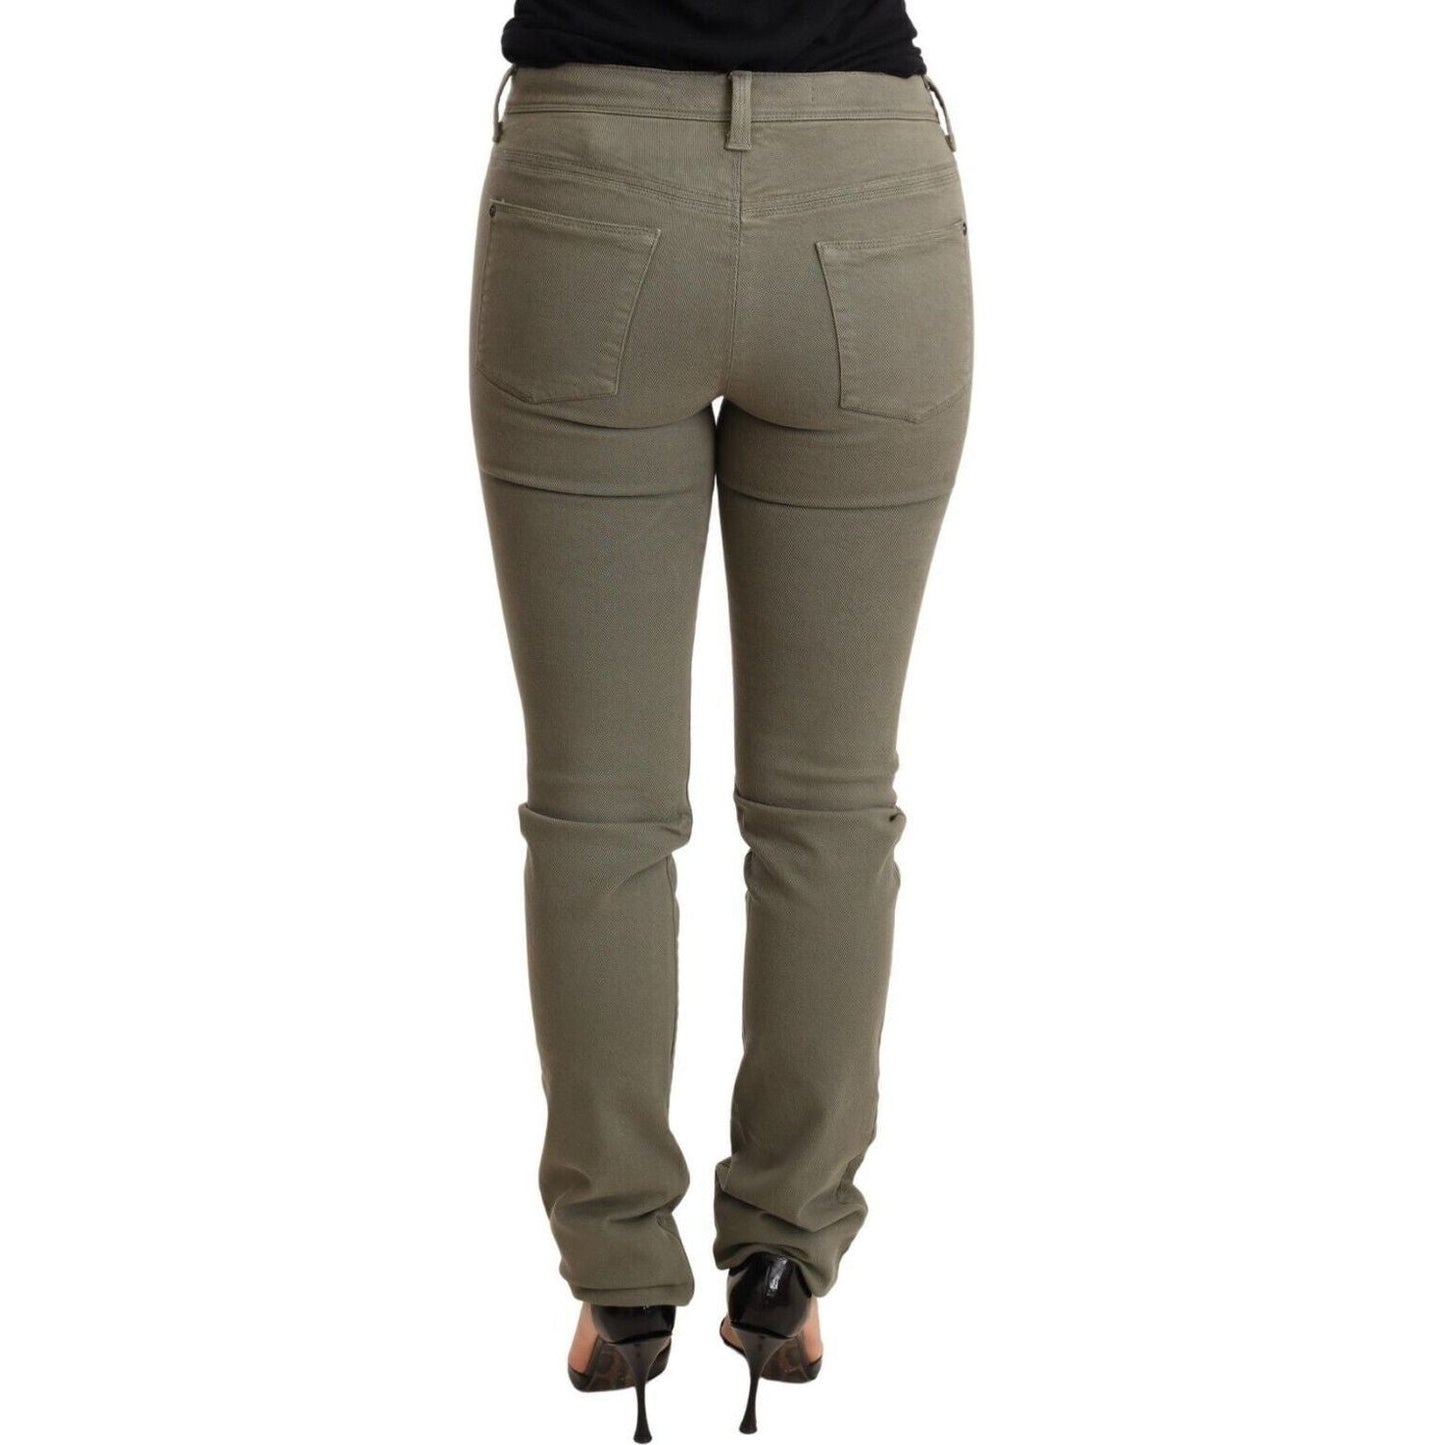 Ermanno Scervino Chic Green Low Waist Skinny Jeans Jeans & Pants green-low-waist-skinny-slim-trouser-cotton-jeans